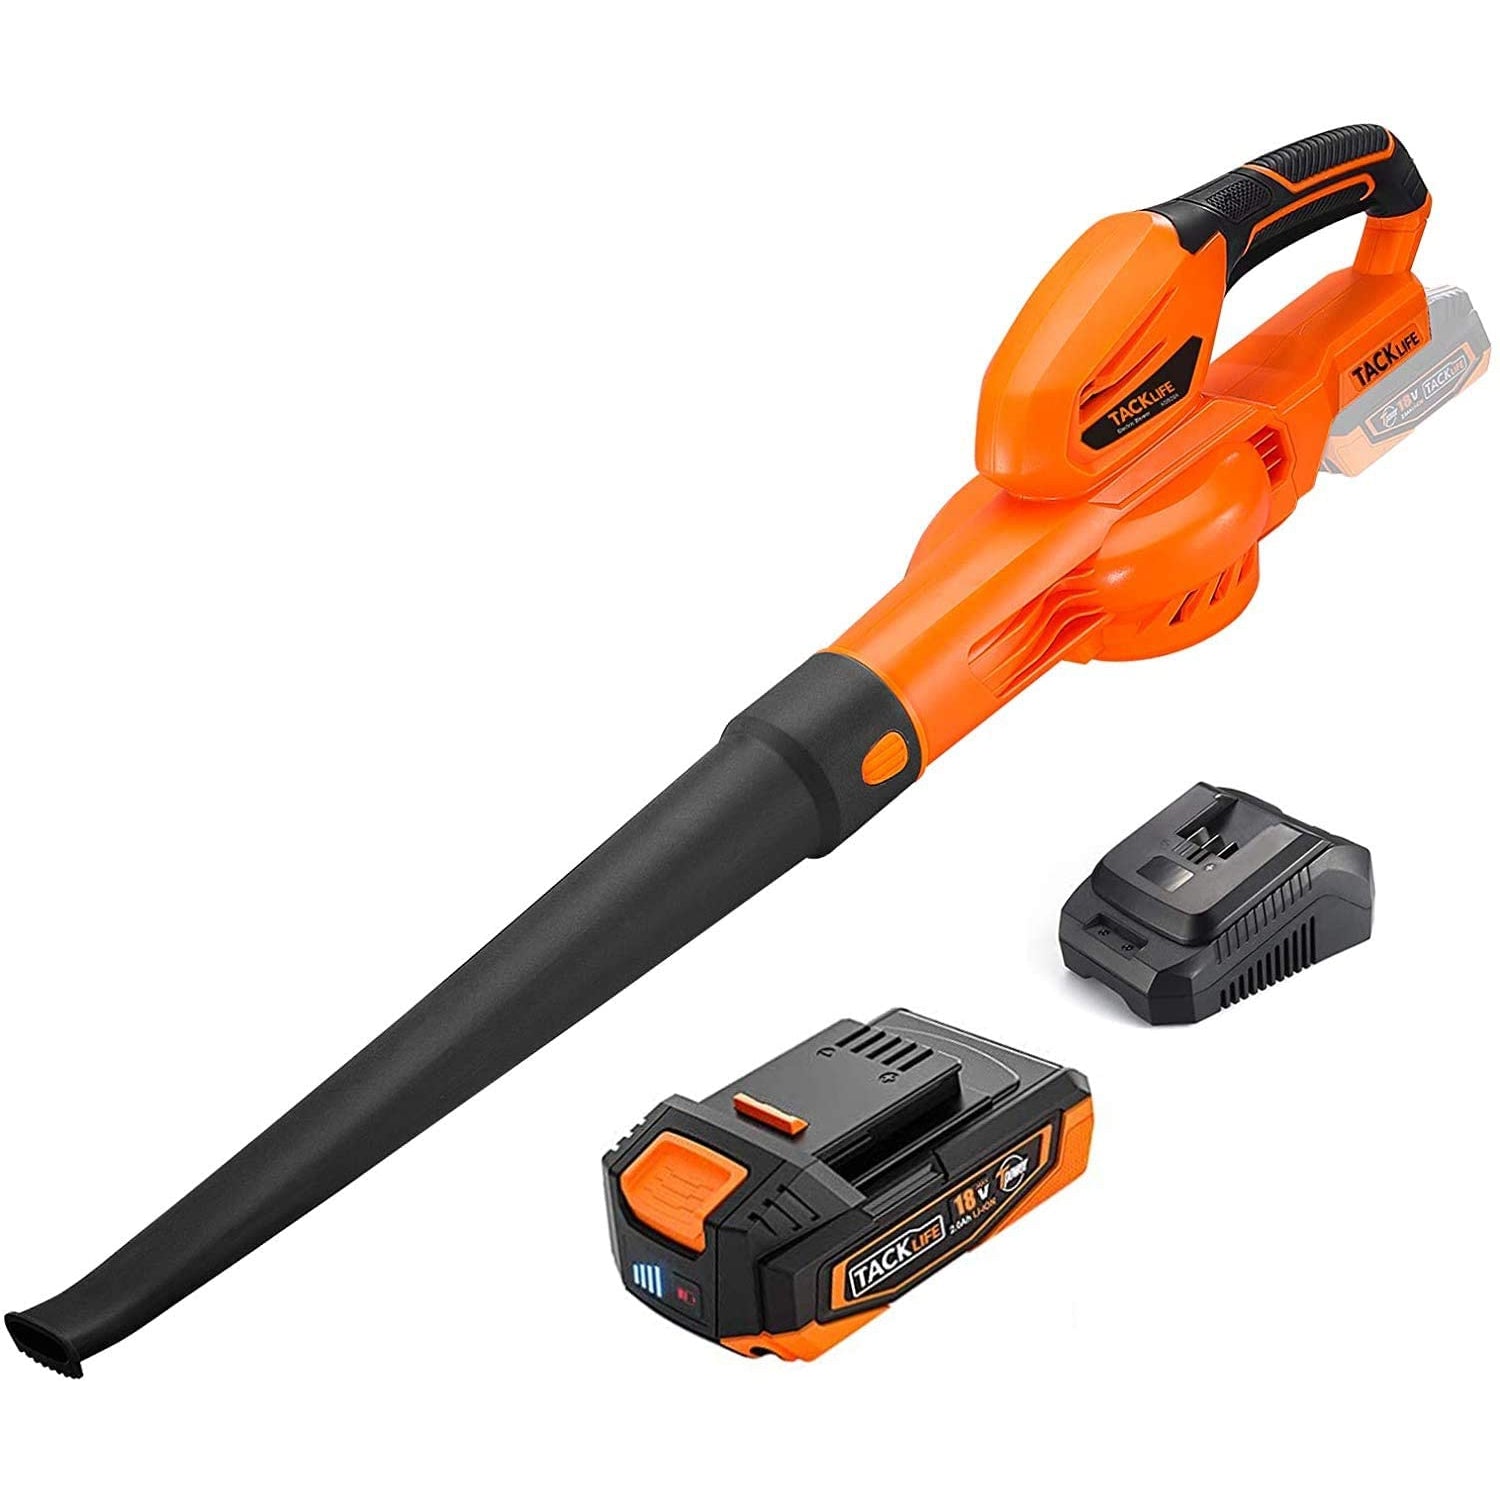 Tacklife KDB20A Battery Blower, 18 V Dead Leaf Blower, 190 km/h, Light Weight, Detachable Tube